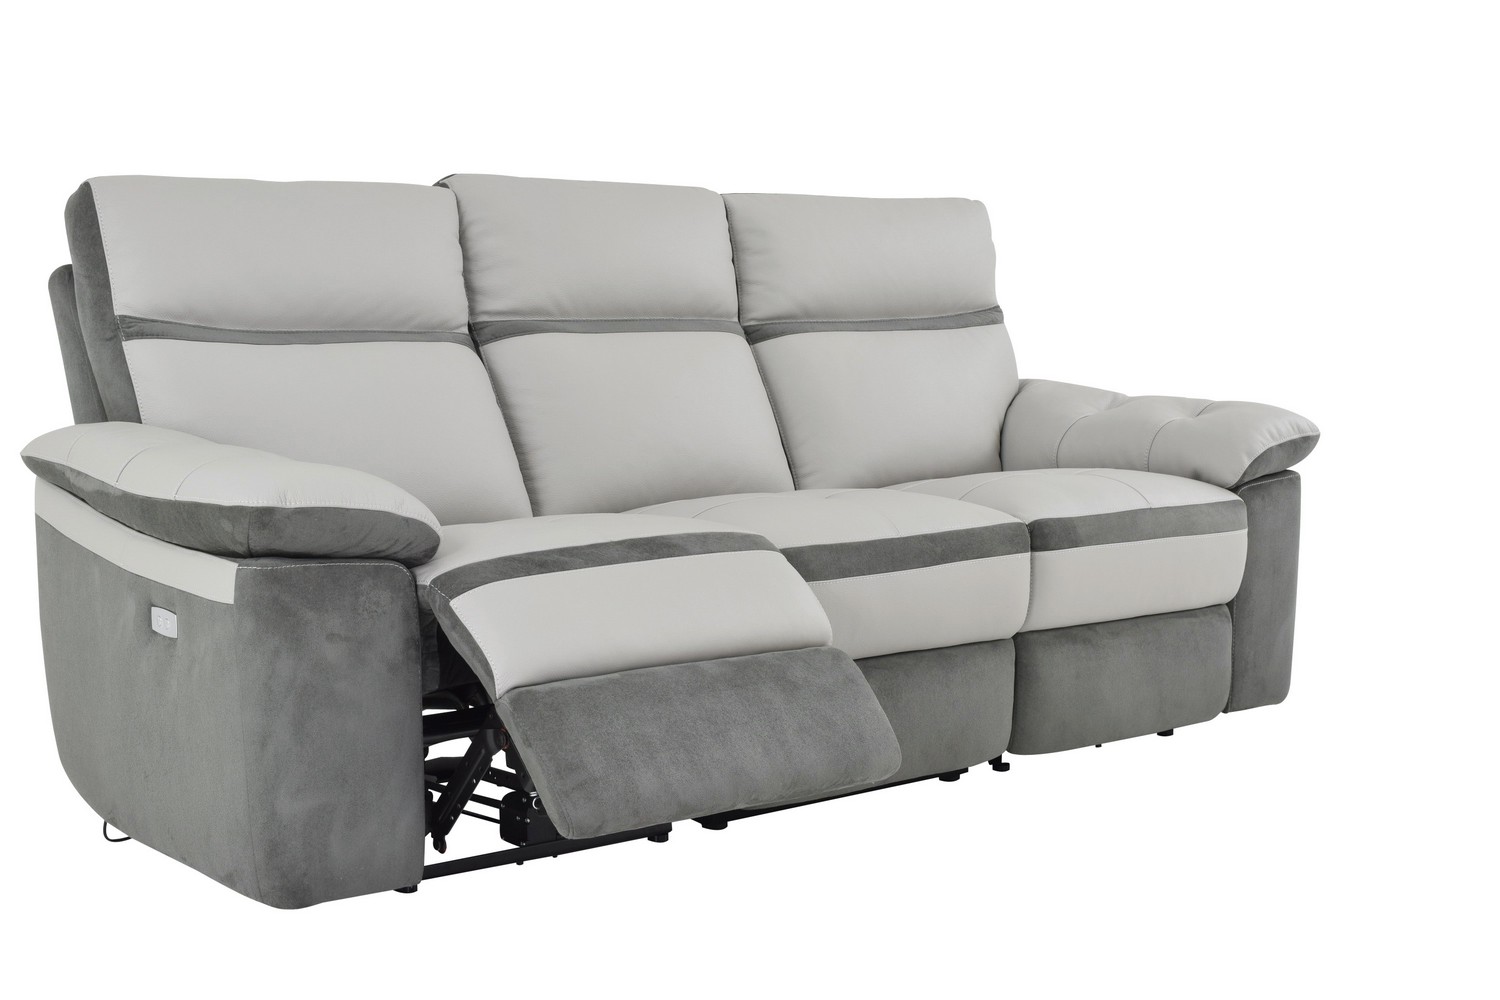 Homelegance Otto Power Double Reclining Sofa - Top Grain Leather - Light Grey